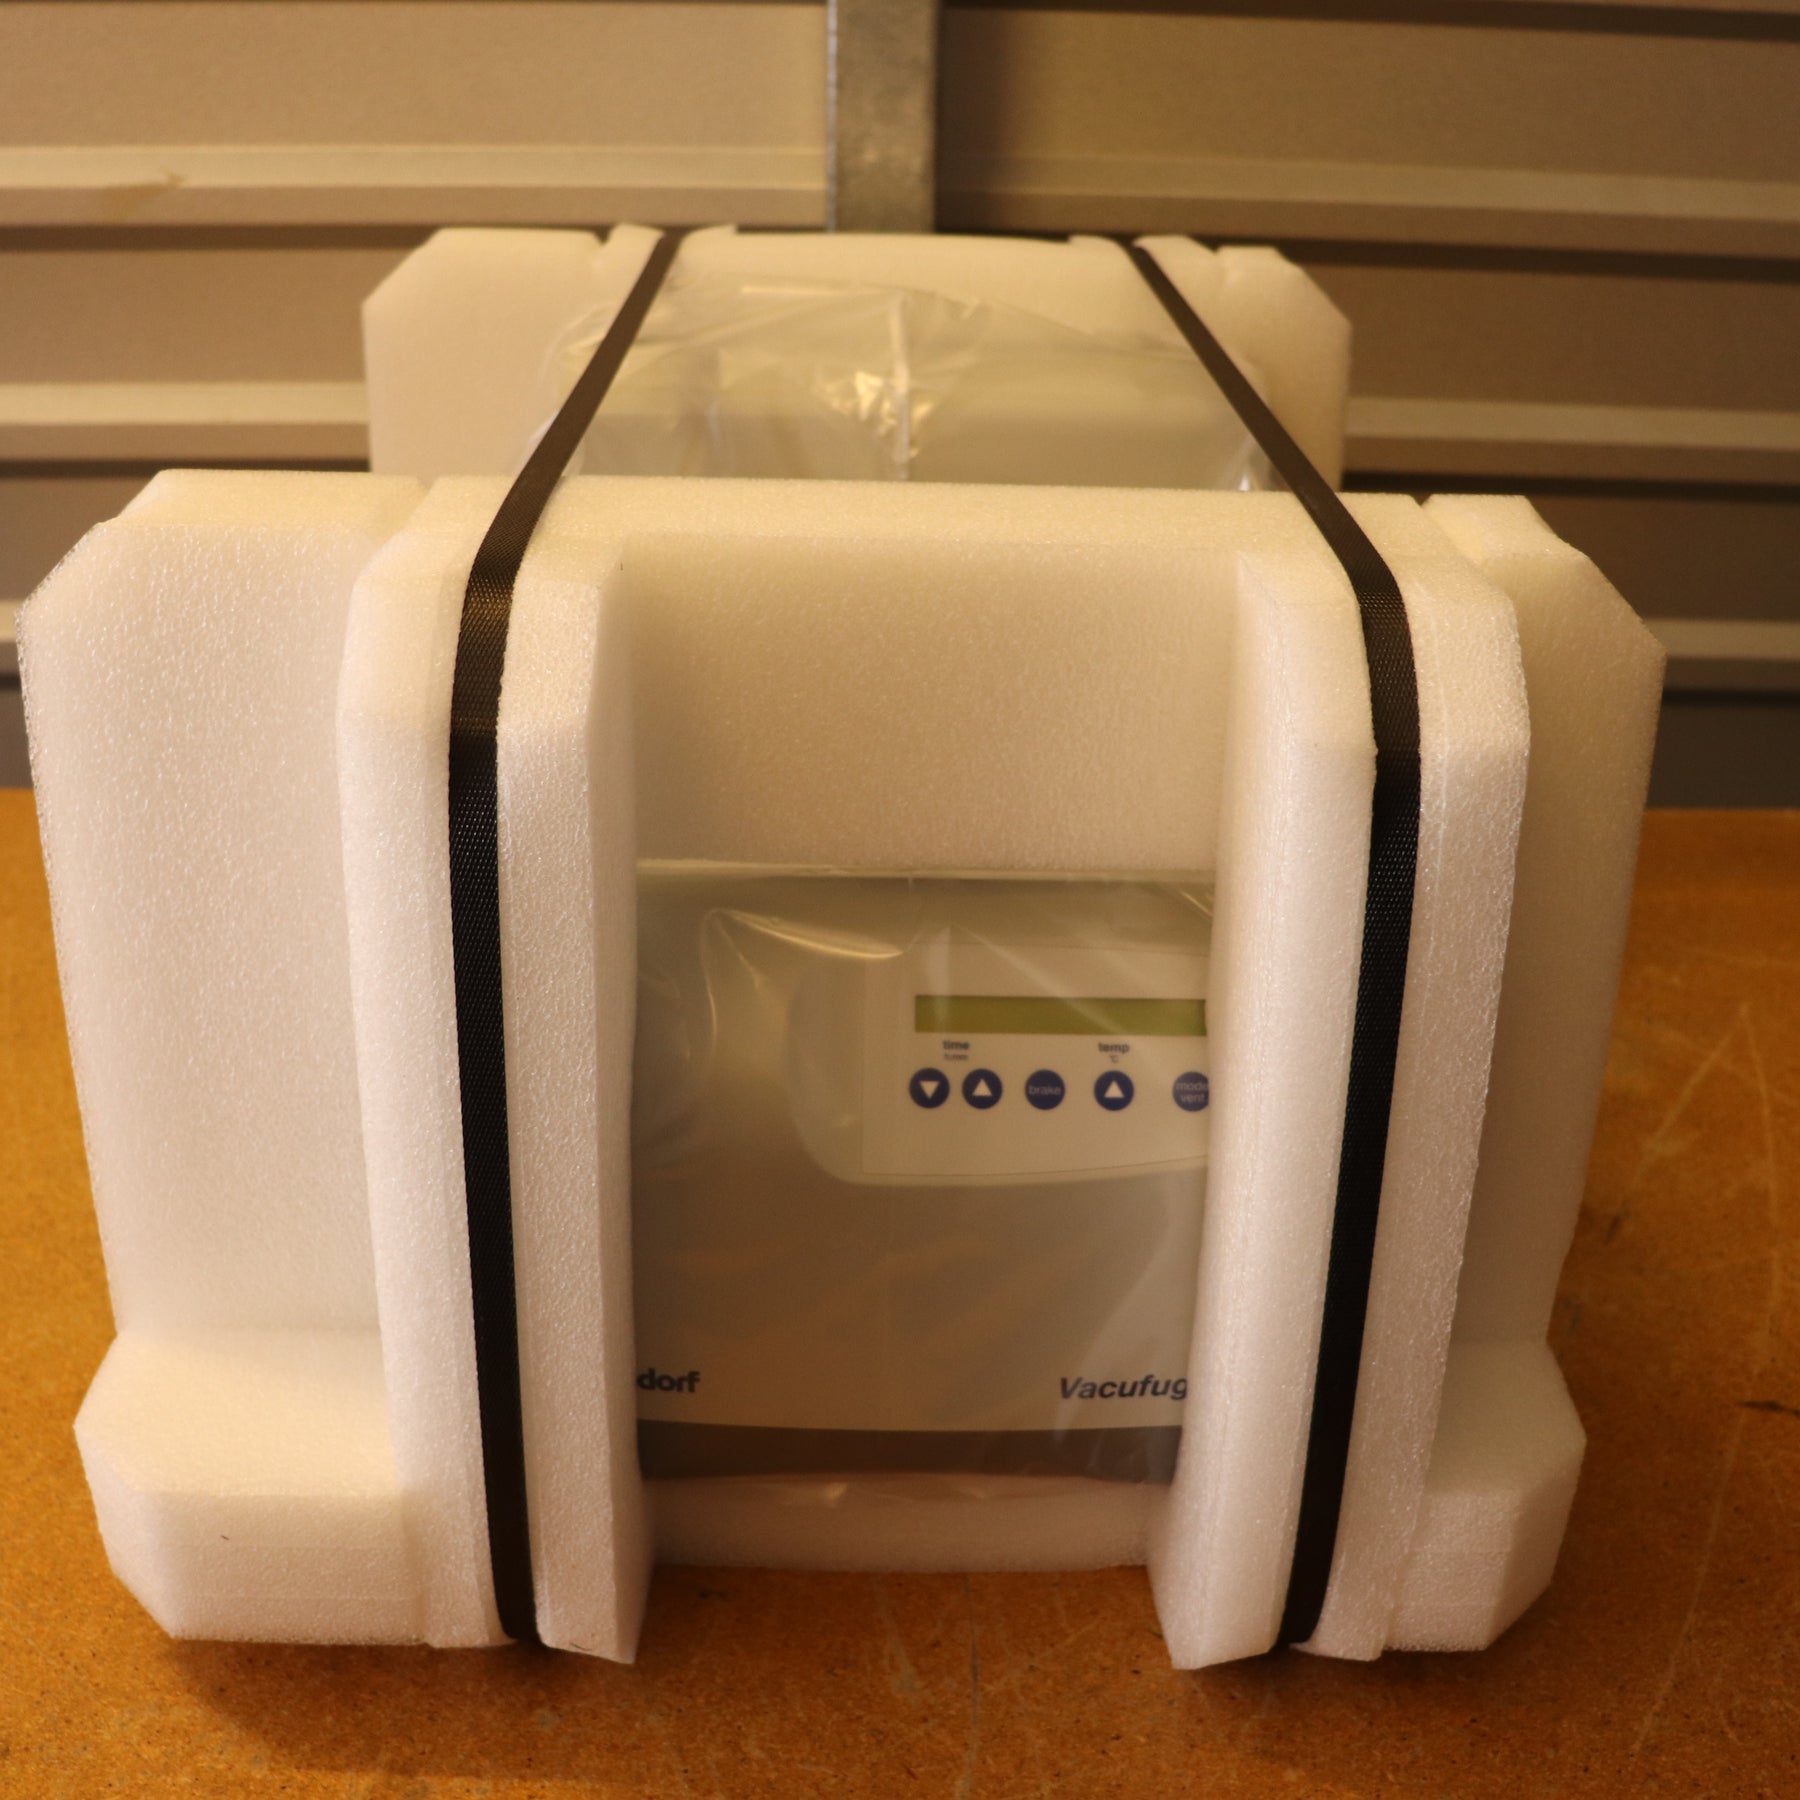 Eppendorf Vacufuge plus Centrifuge Concentrator with Rotor 5305 REF 022820109